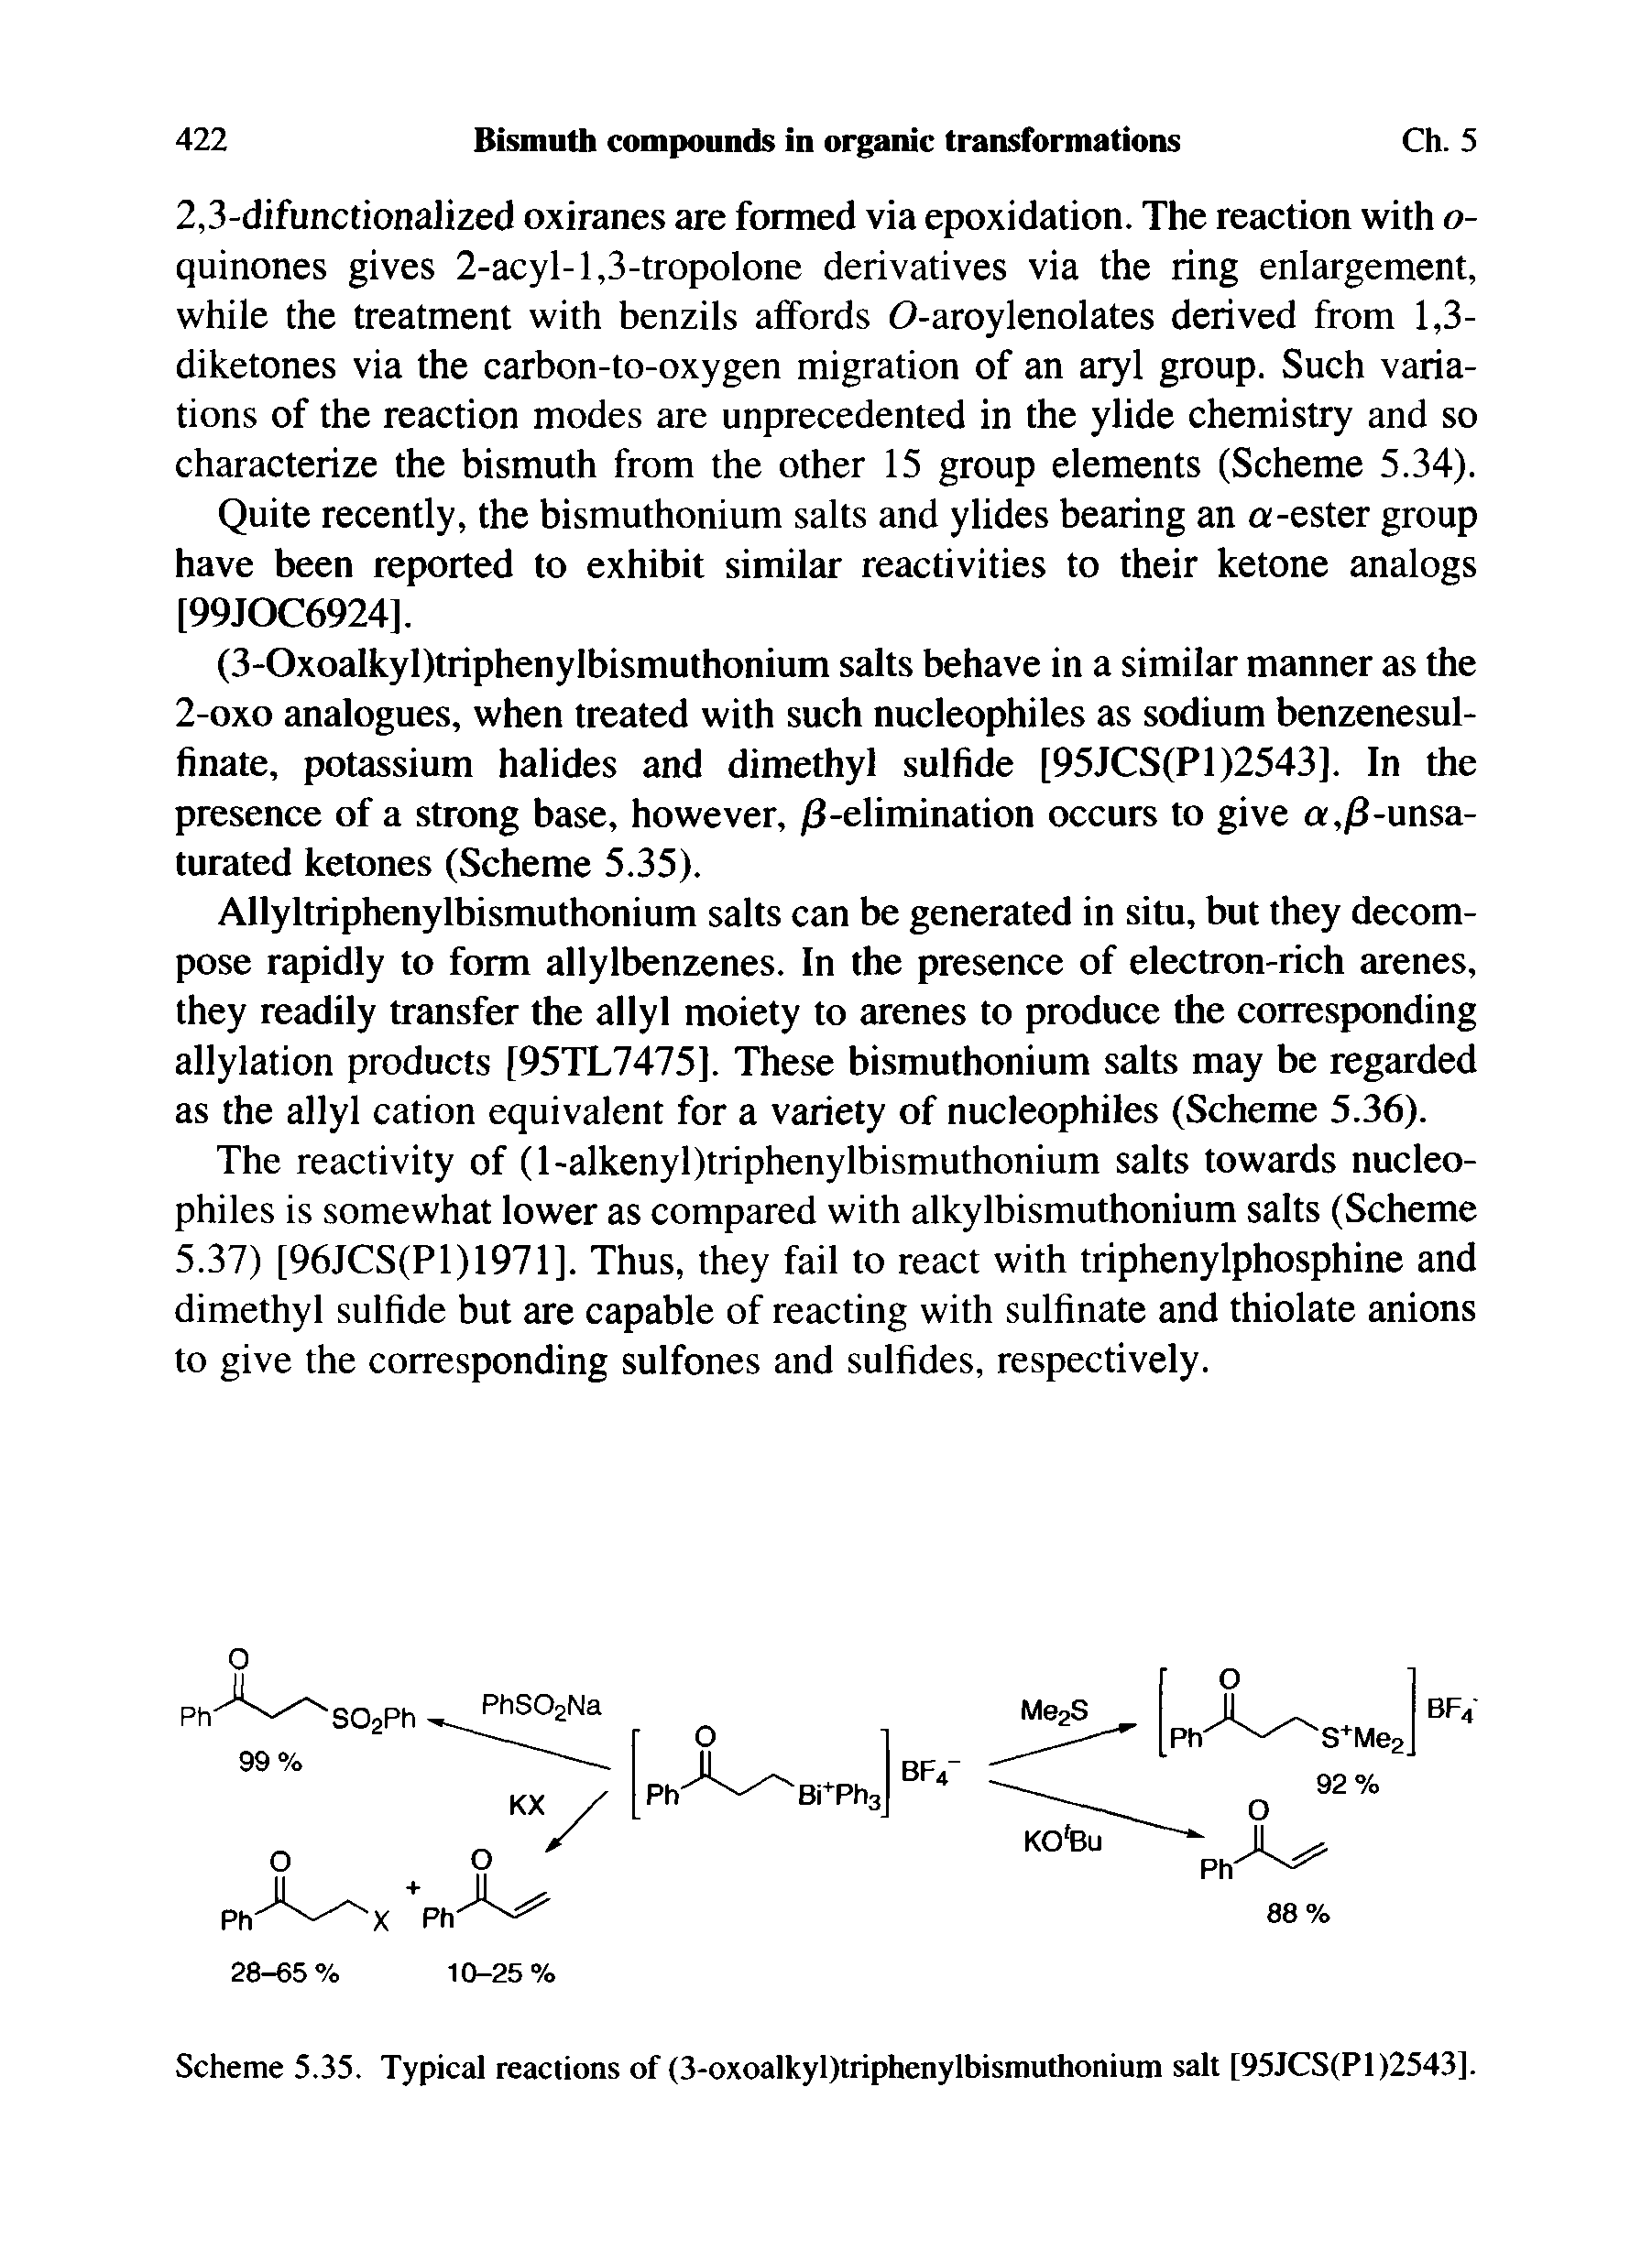 Scheme 5.35. Typical reactions of (3-oxoalkyl)triphenylbismuthonium salt [95JCS(P1)2543].